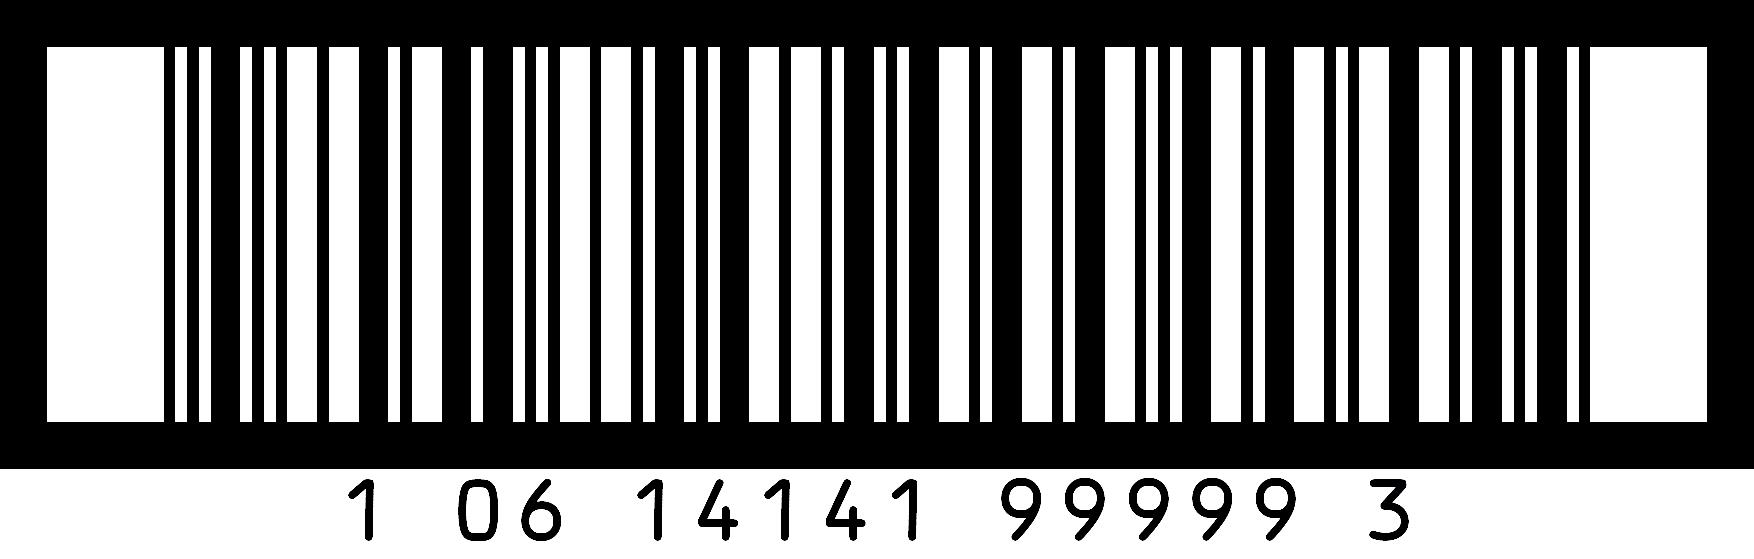 Linear Barcode Symbologies